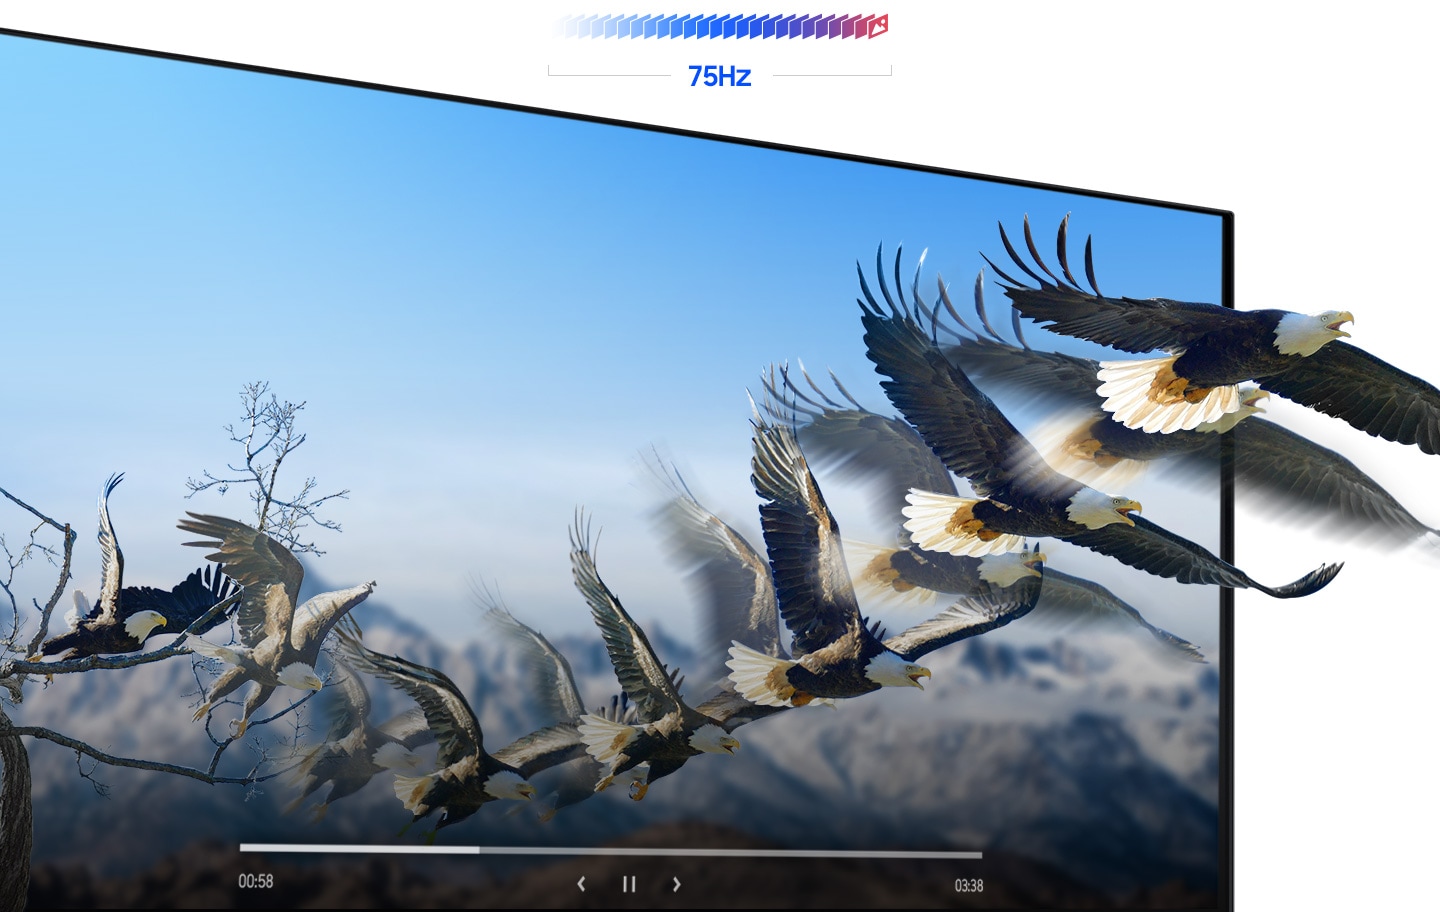 A bird is flying off the monitor screen, showing the fluid picture delivery of the 75HZ screen.